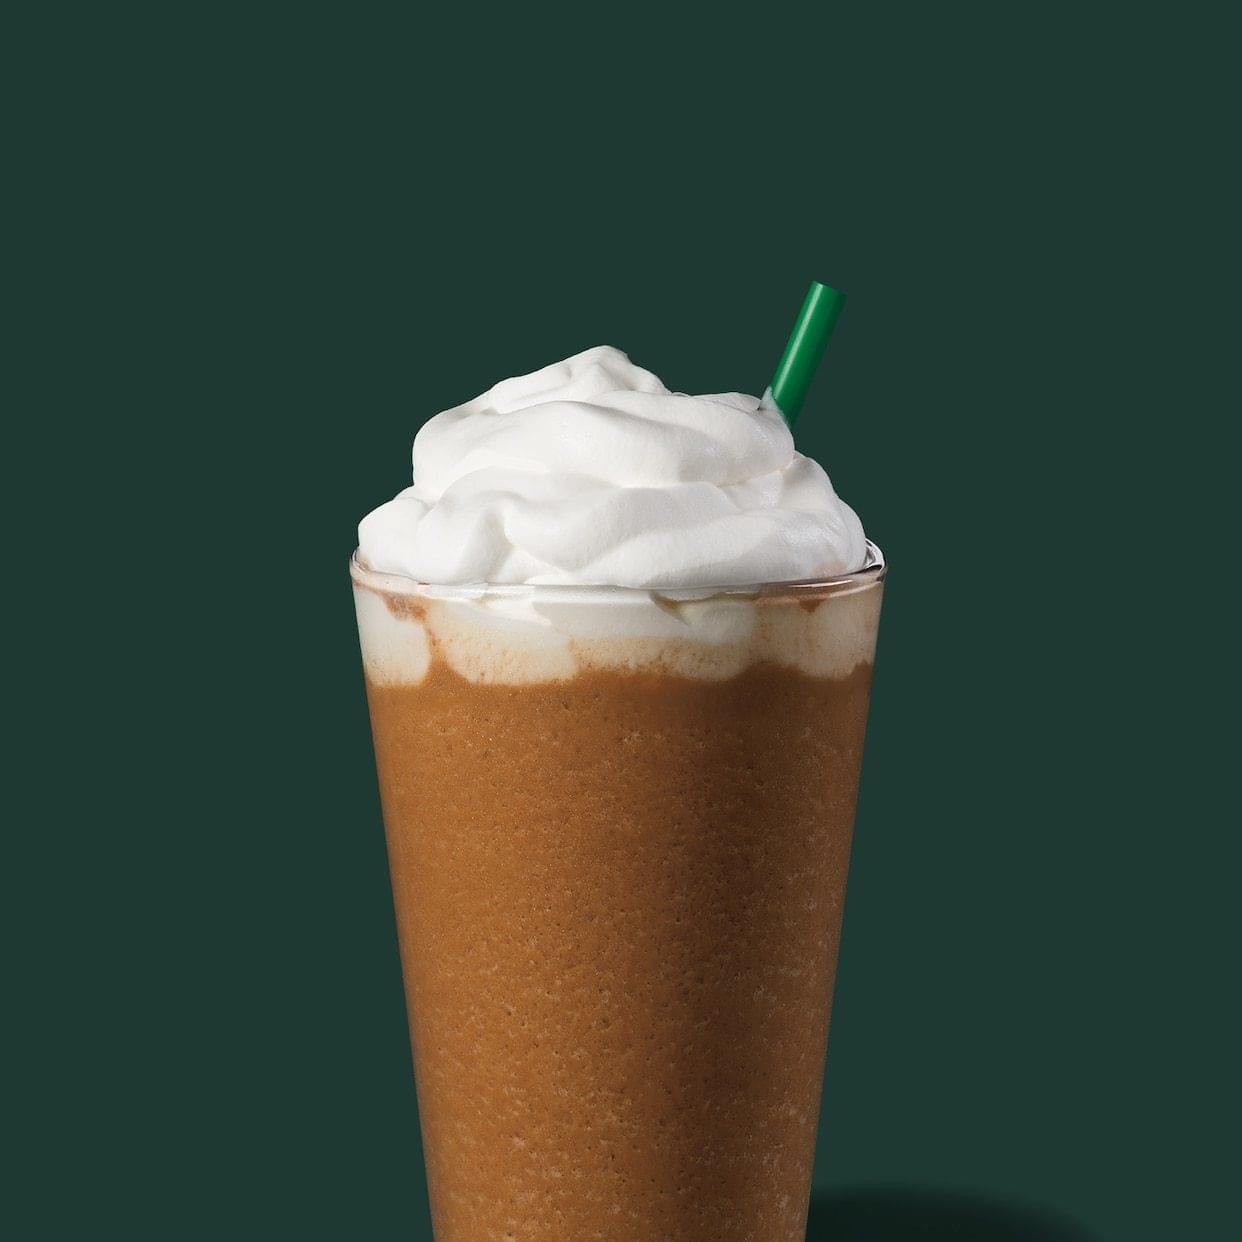 How much is a venti frappuccino at starbucks 2020